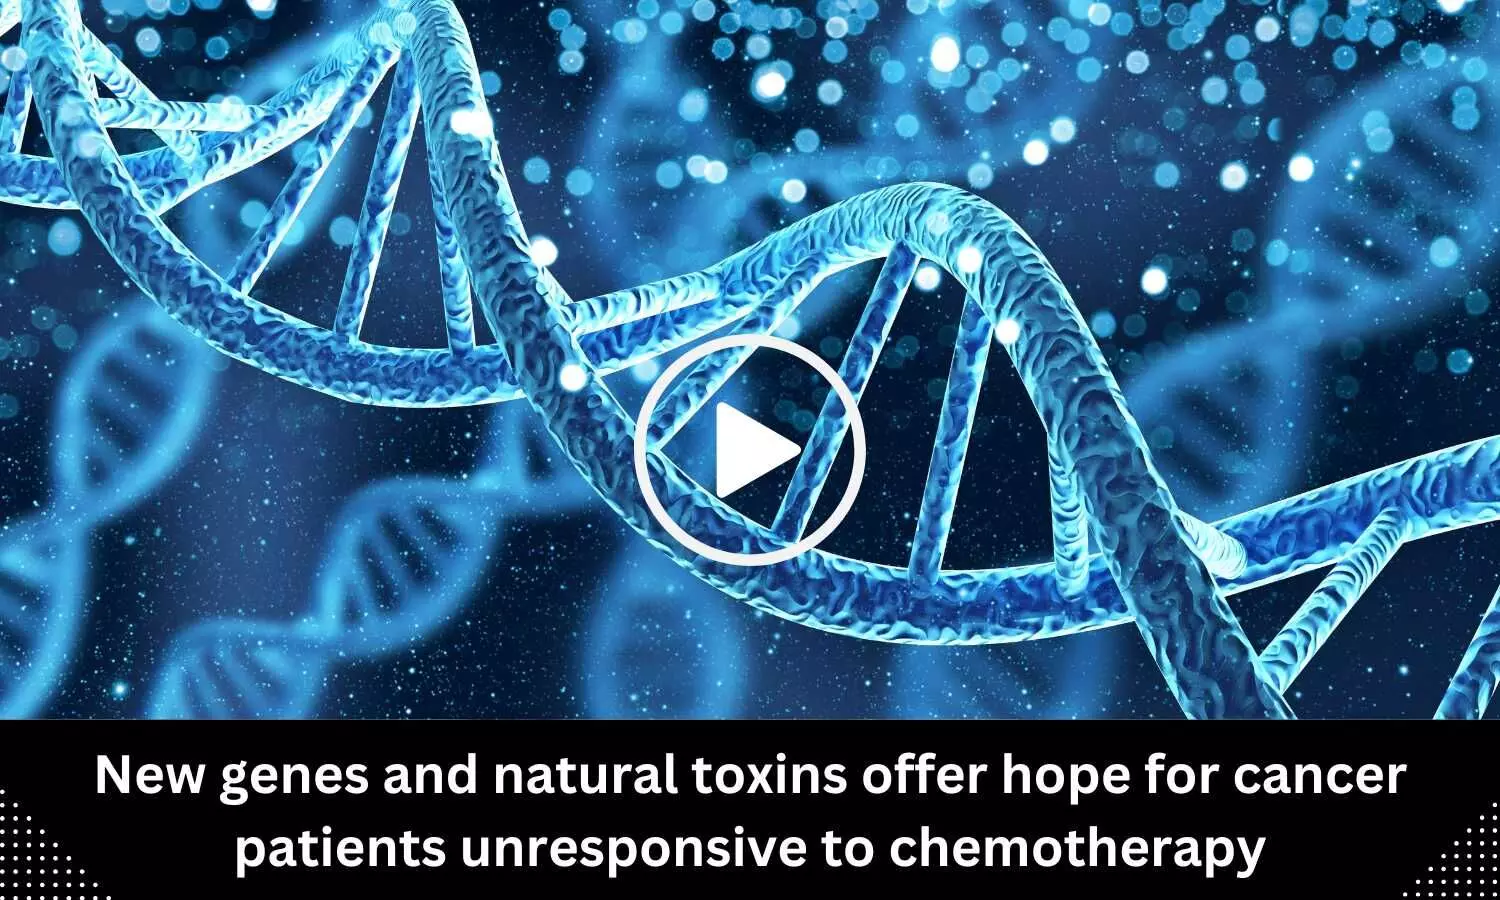 New genes and natural toxins offer hope for cancer patients unresponsive to chemotherapy